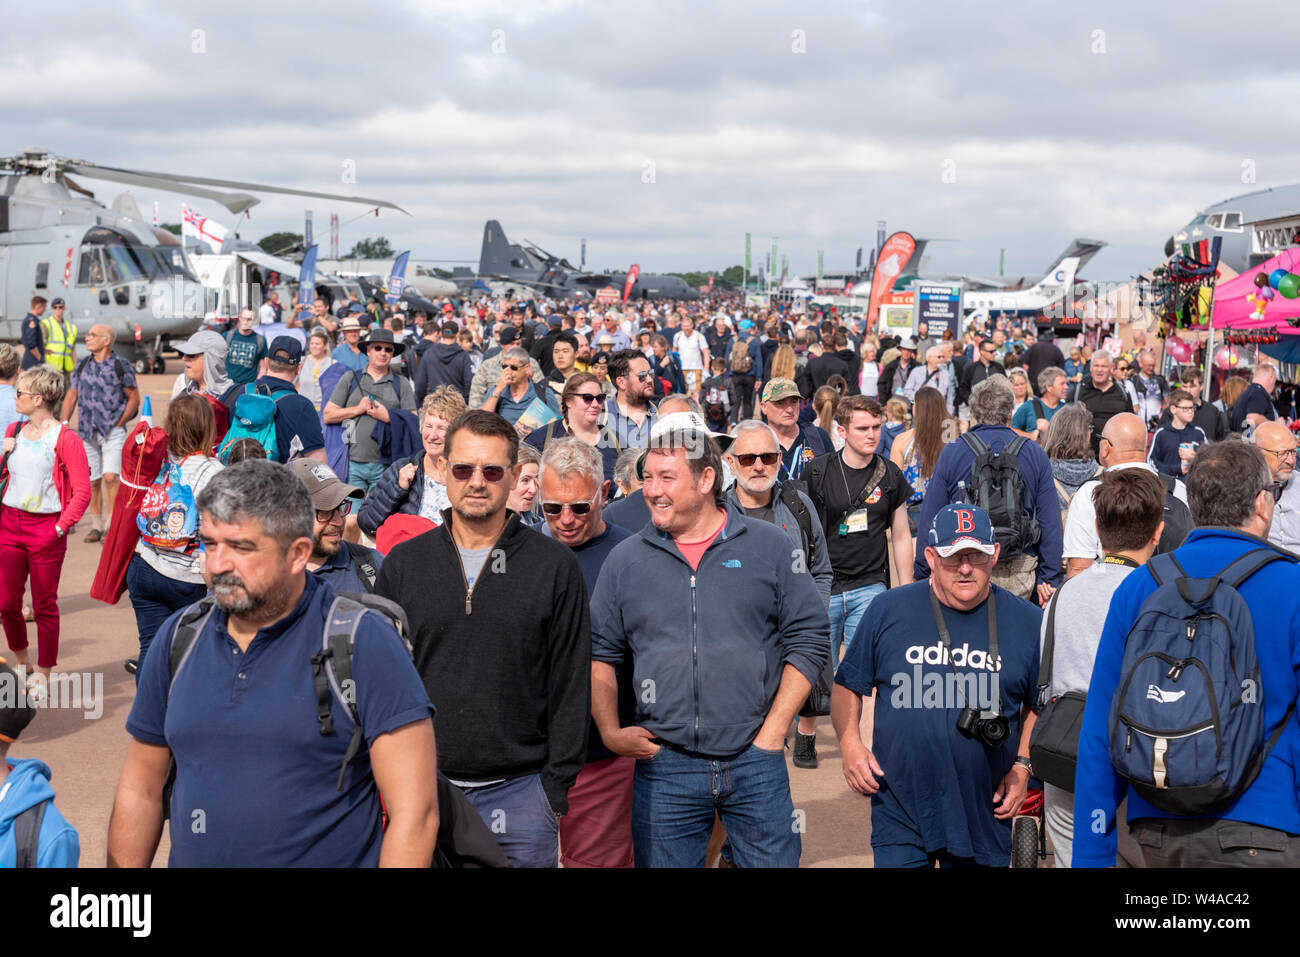 RAF Fairford, Gloucestershire, UK.. RIAT is regarded as the world's largest military airshow with participating aircraft flying in from all over the globe, with over 30 air arms from 20 different countries present in 2019. Huge crowds Stock Photo